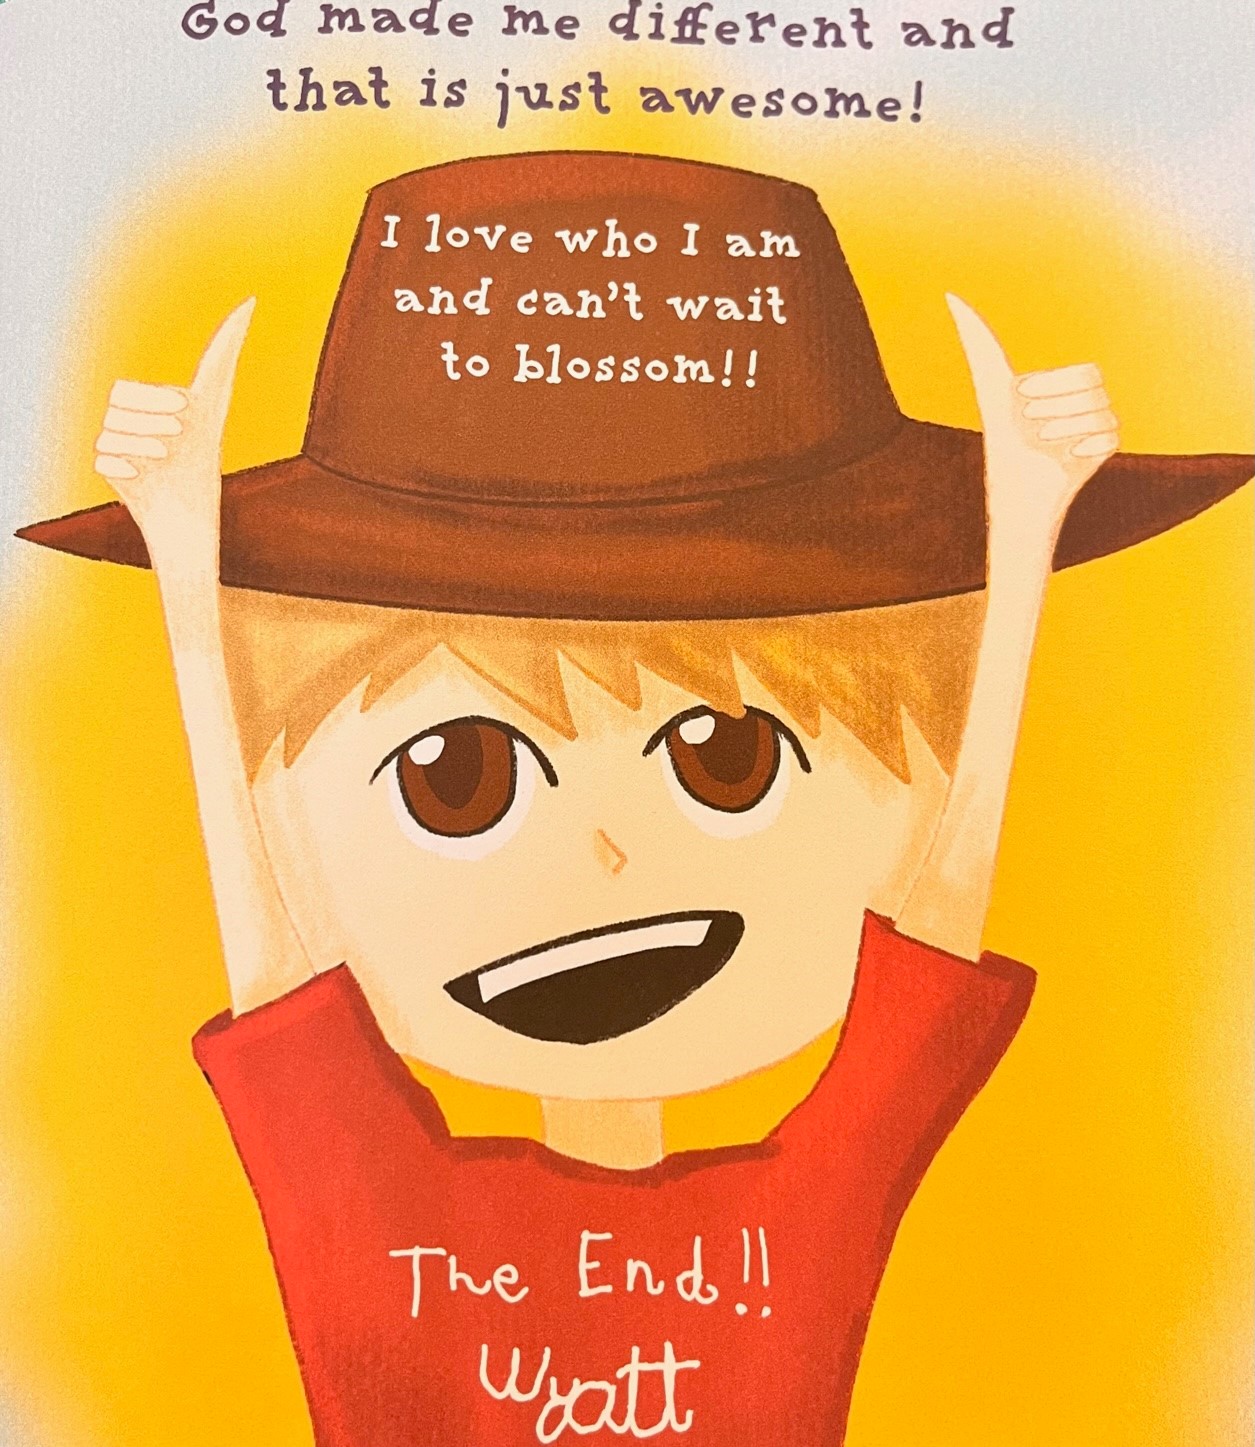 a page from Wyatt Shield's book "Wyatt's Big Adventure with Shriners."